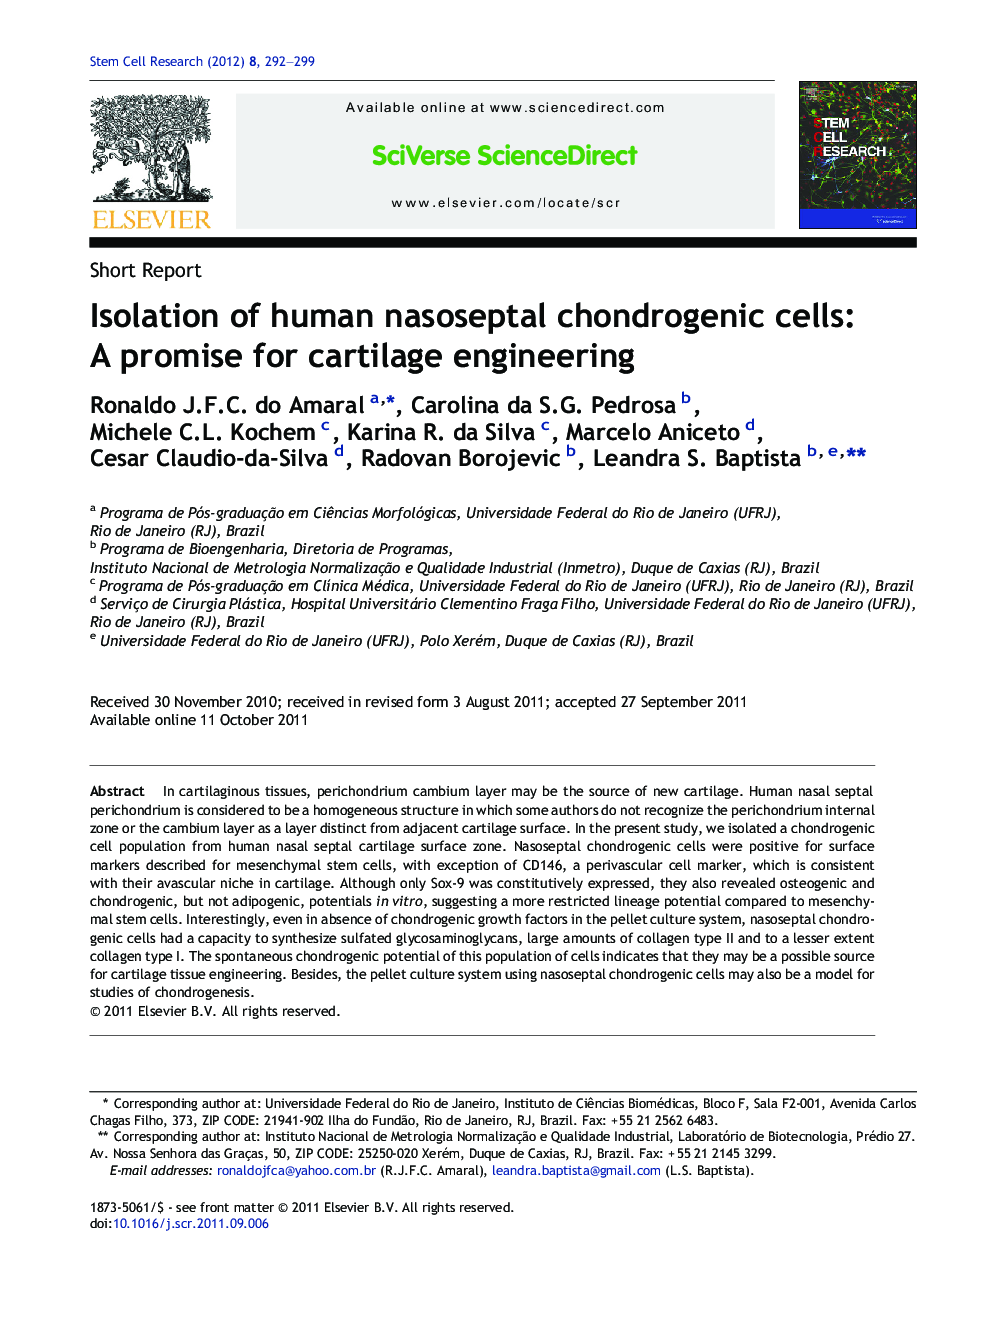 Isolation of human nasoseptal chondrogenic cells: A promise for cartilage engineering